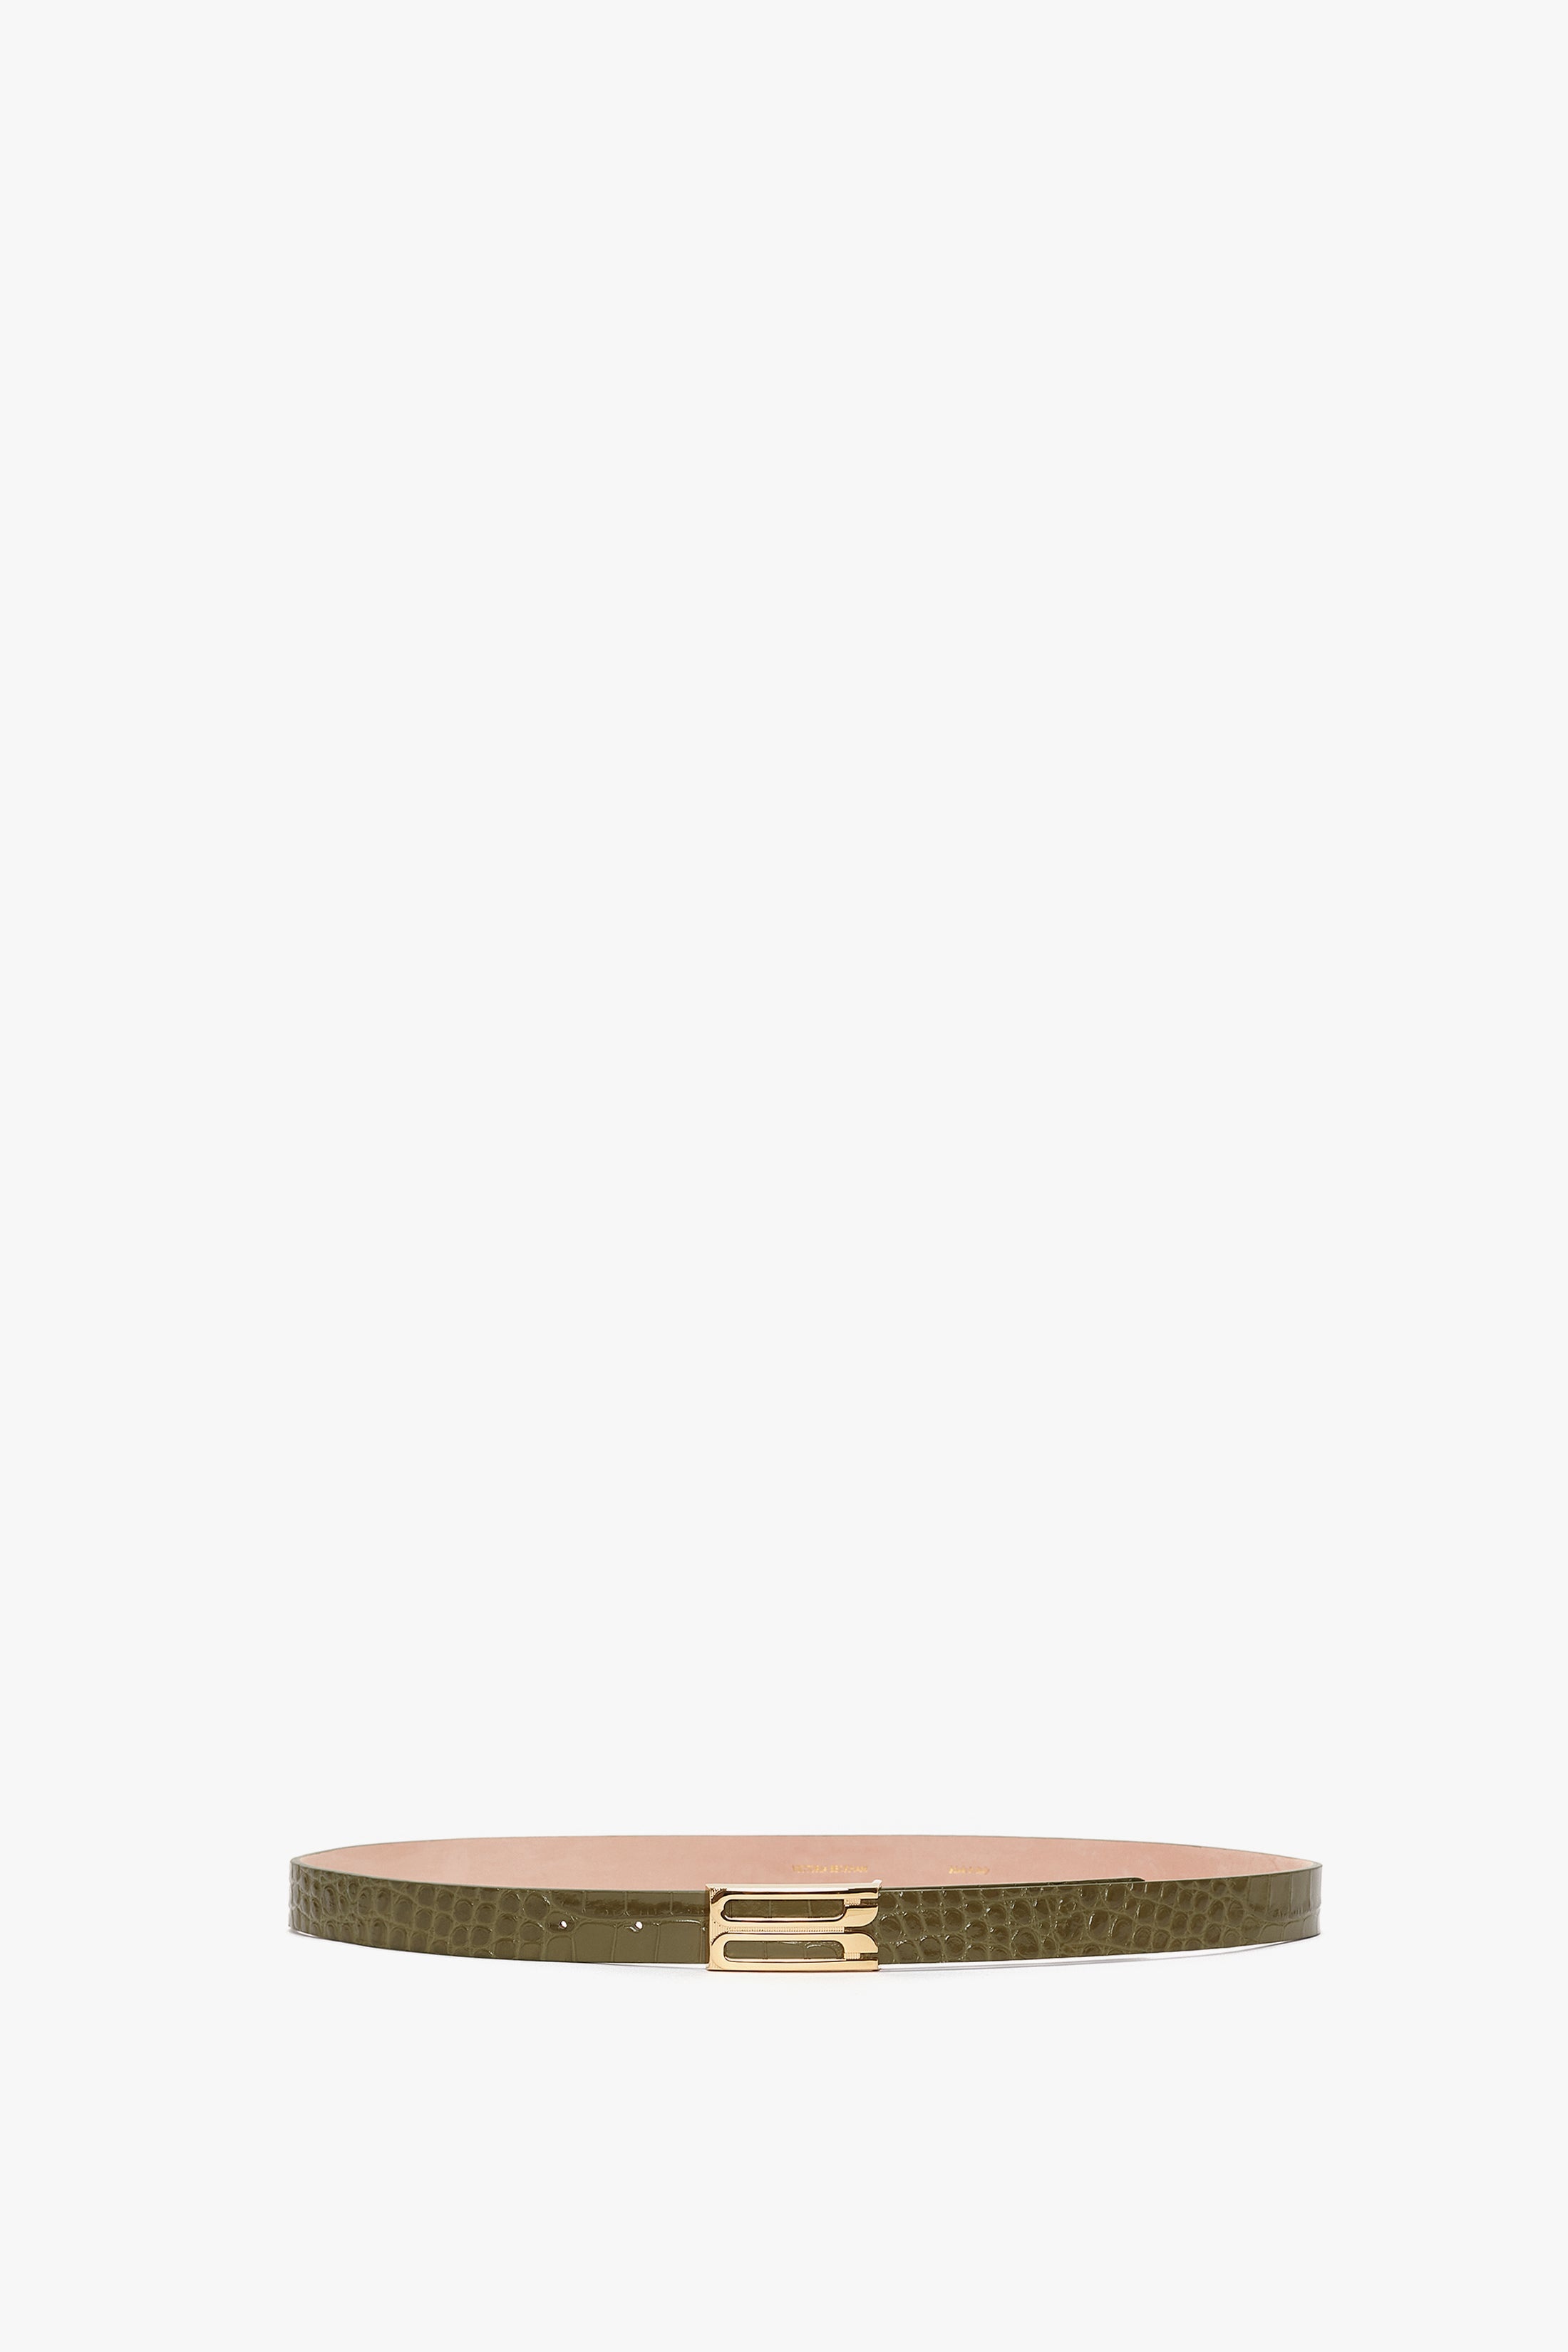 Exclusive Frame Belt In Khaki Croc Embossed Calf Leather - 1